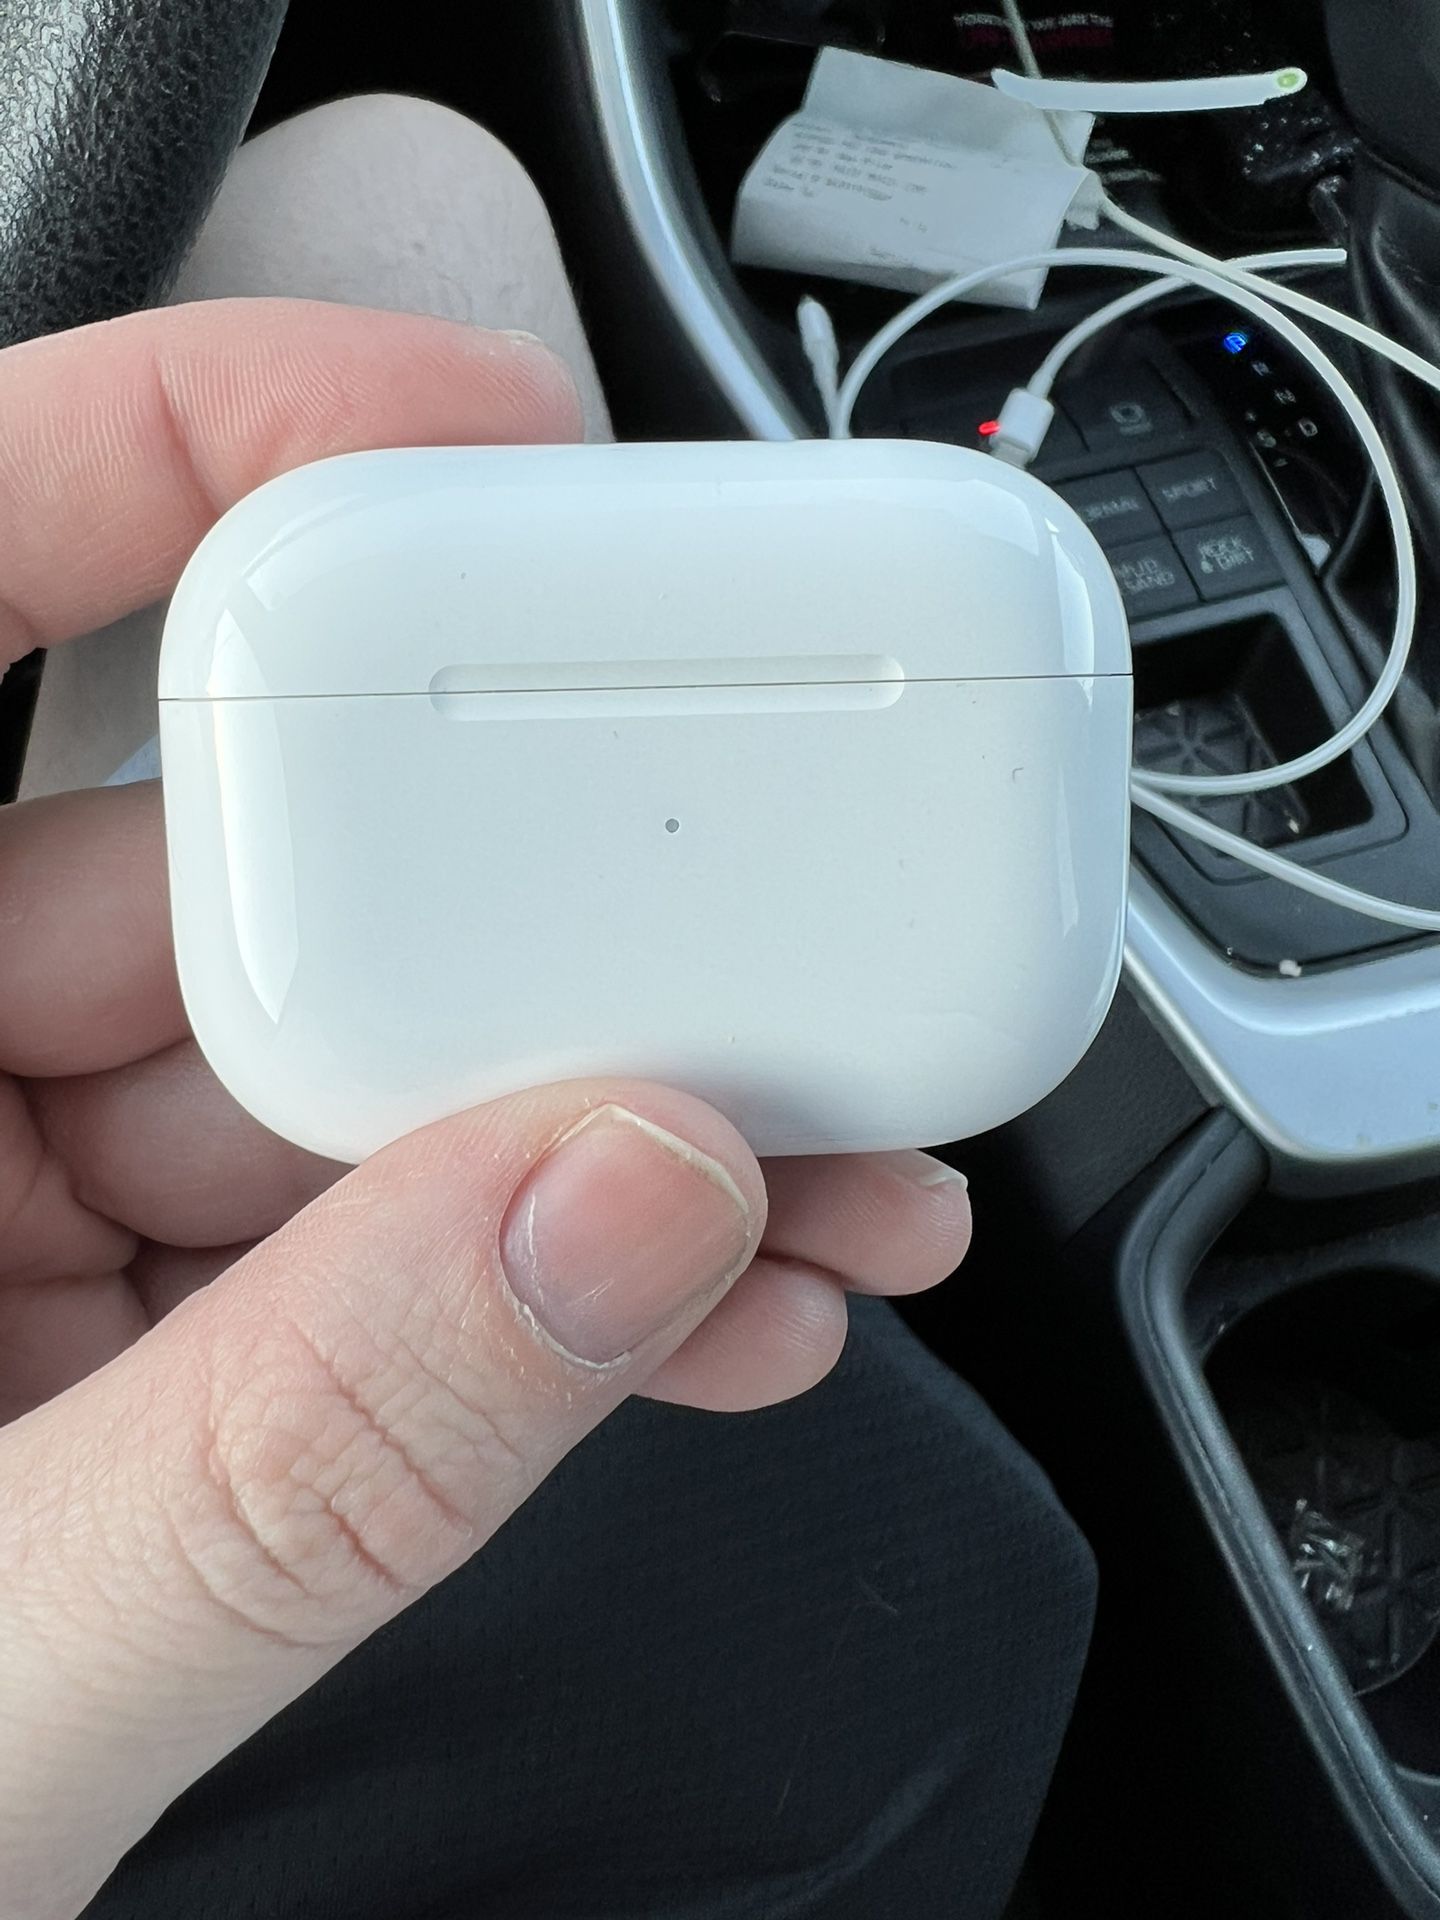 AirPod Pros (2nd Generation)